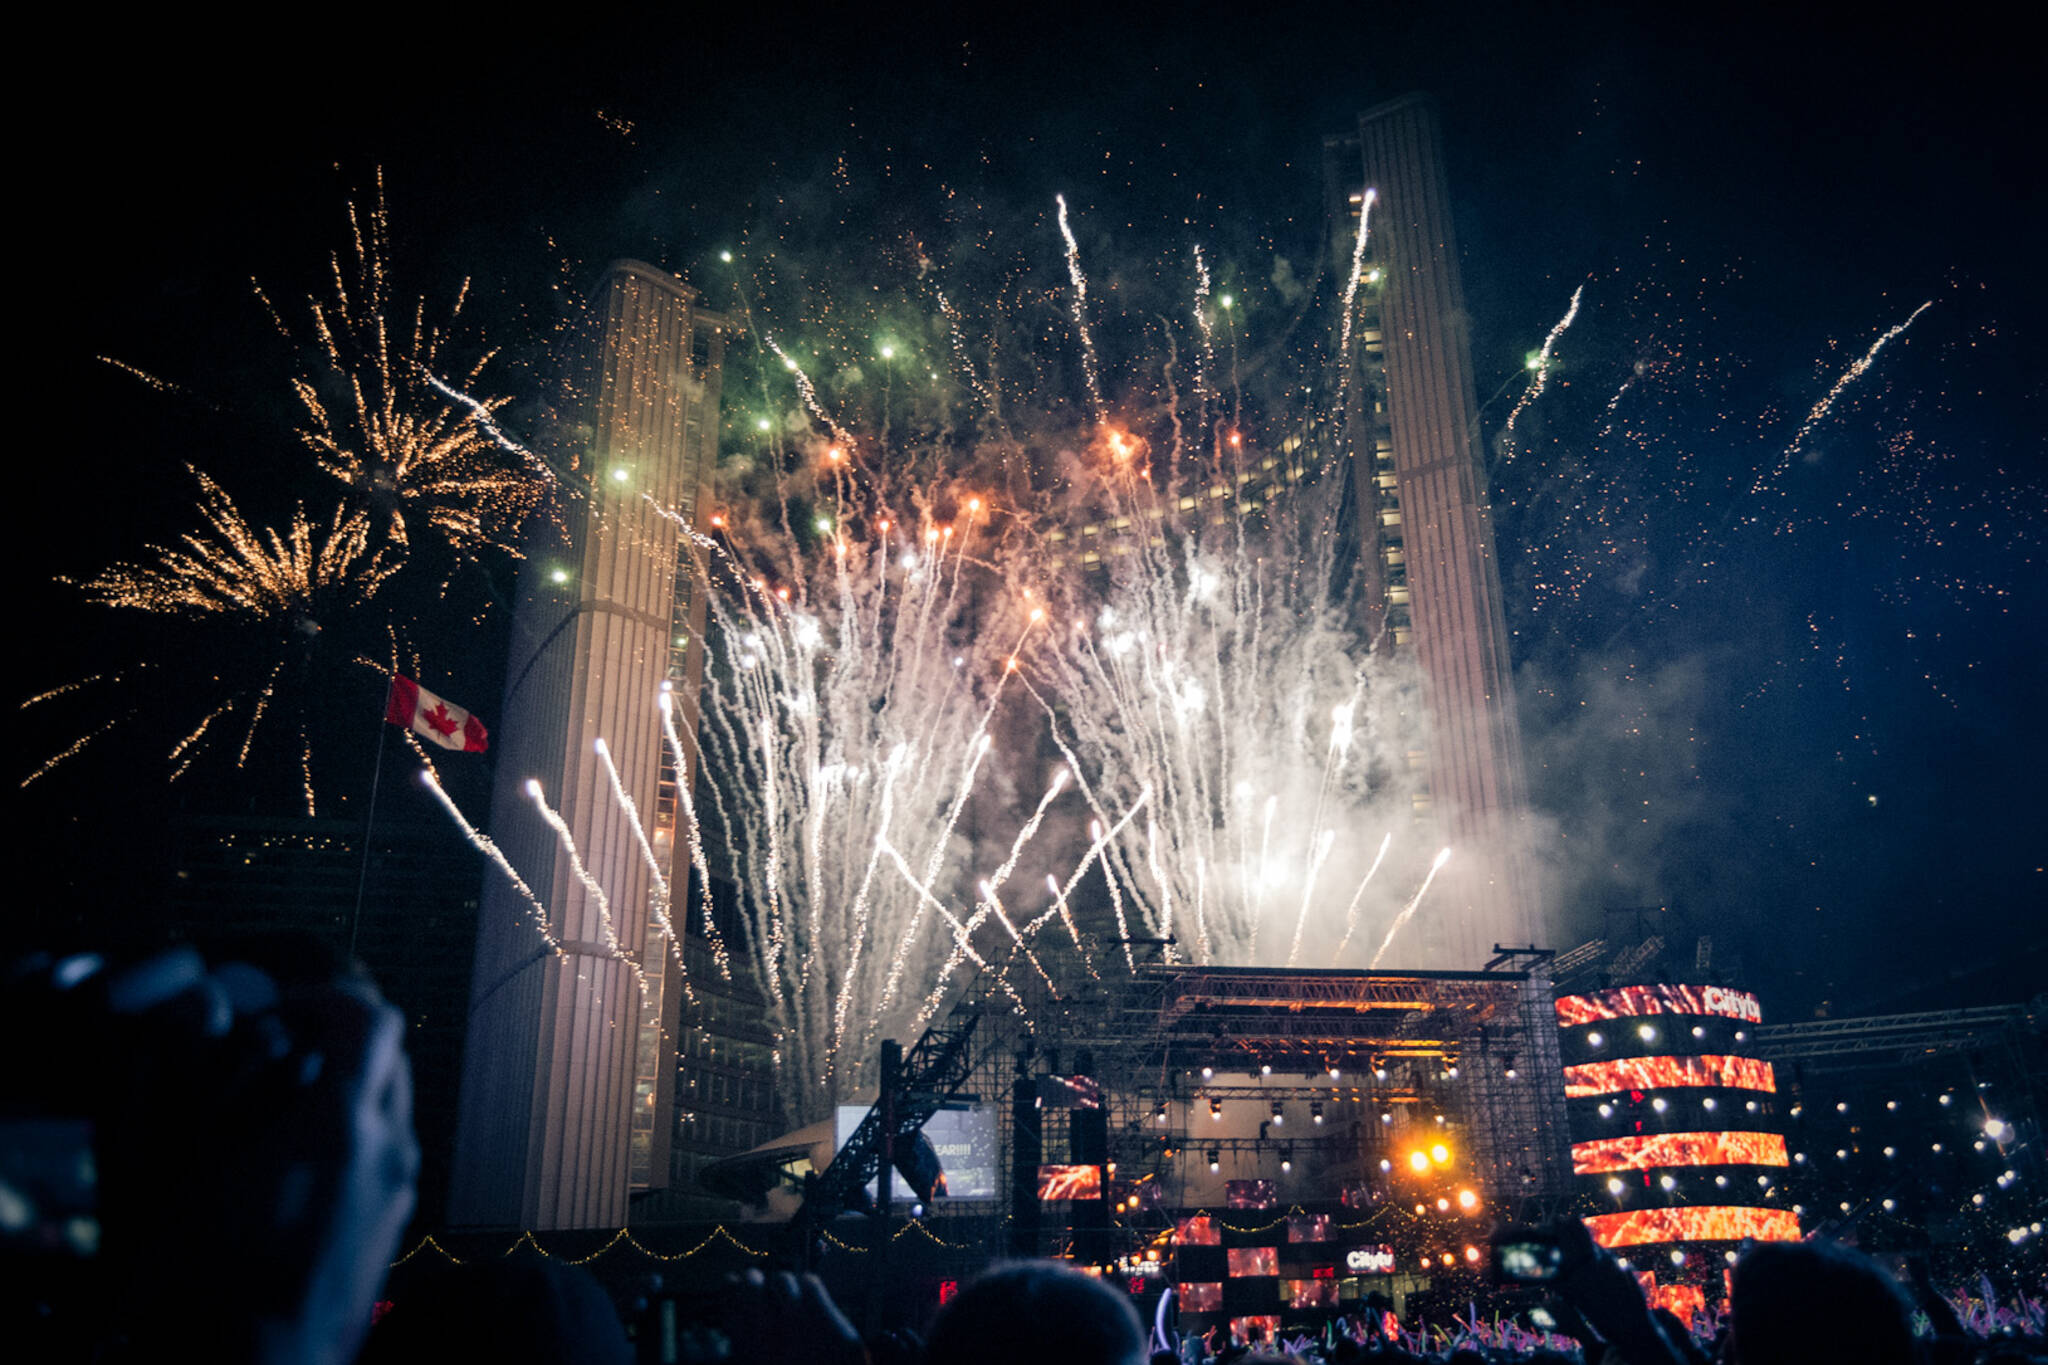 10 free events on New Year's Eve in Toronto